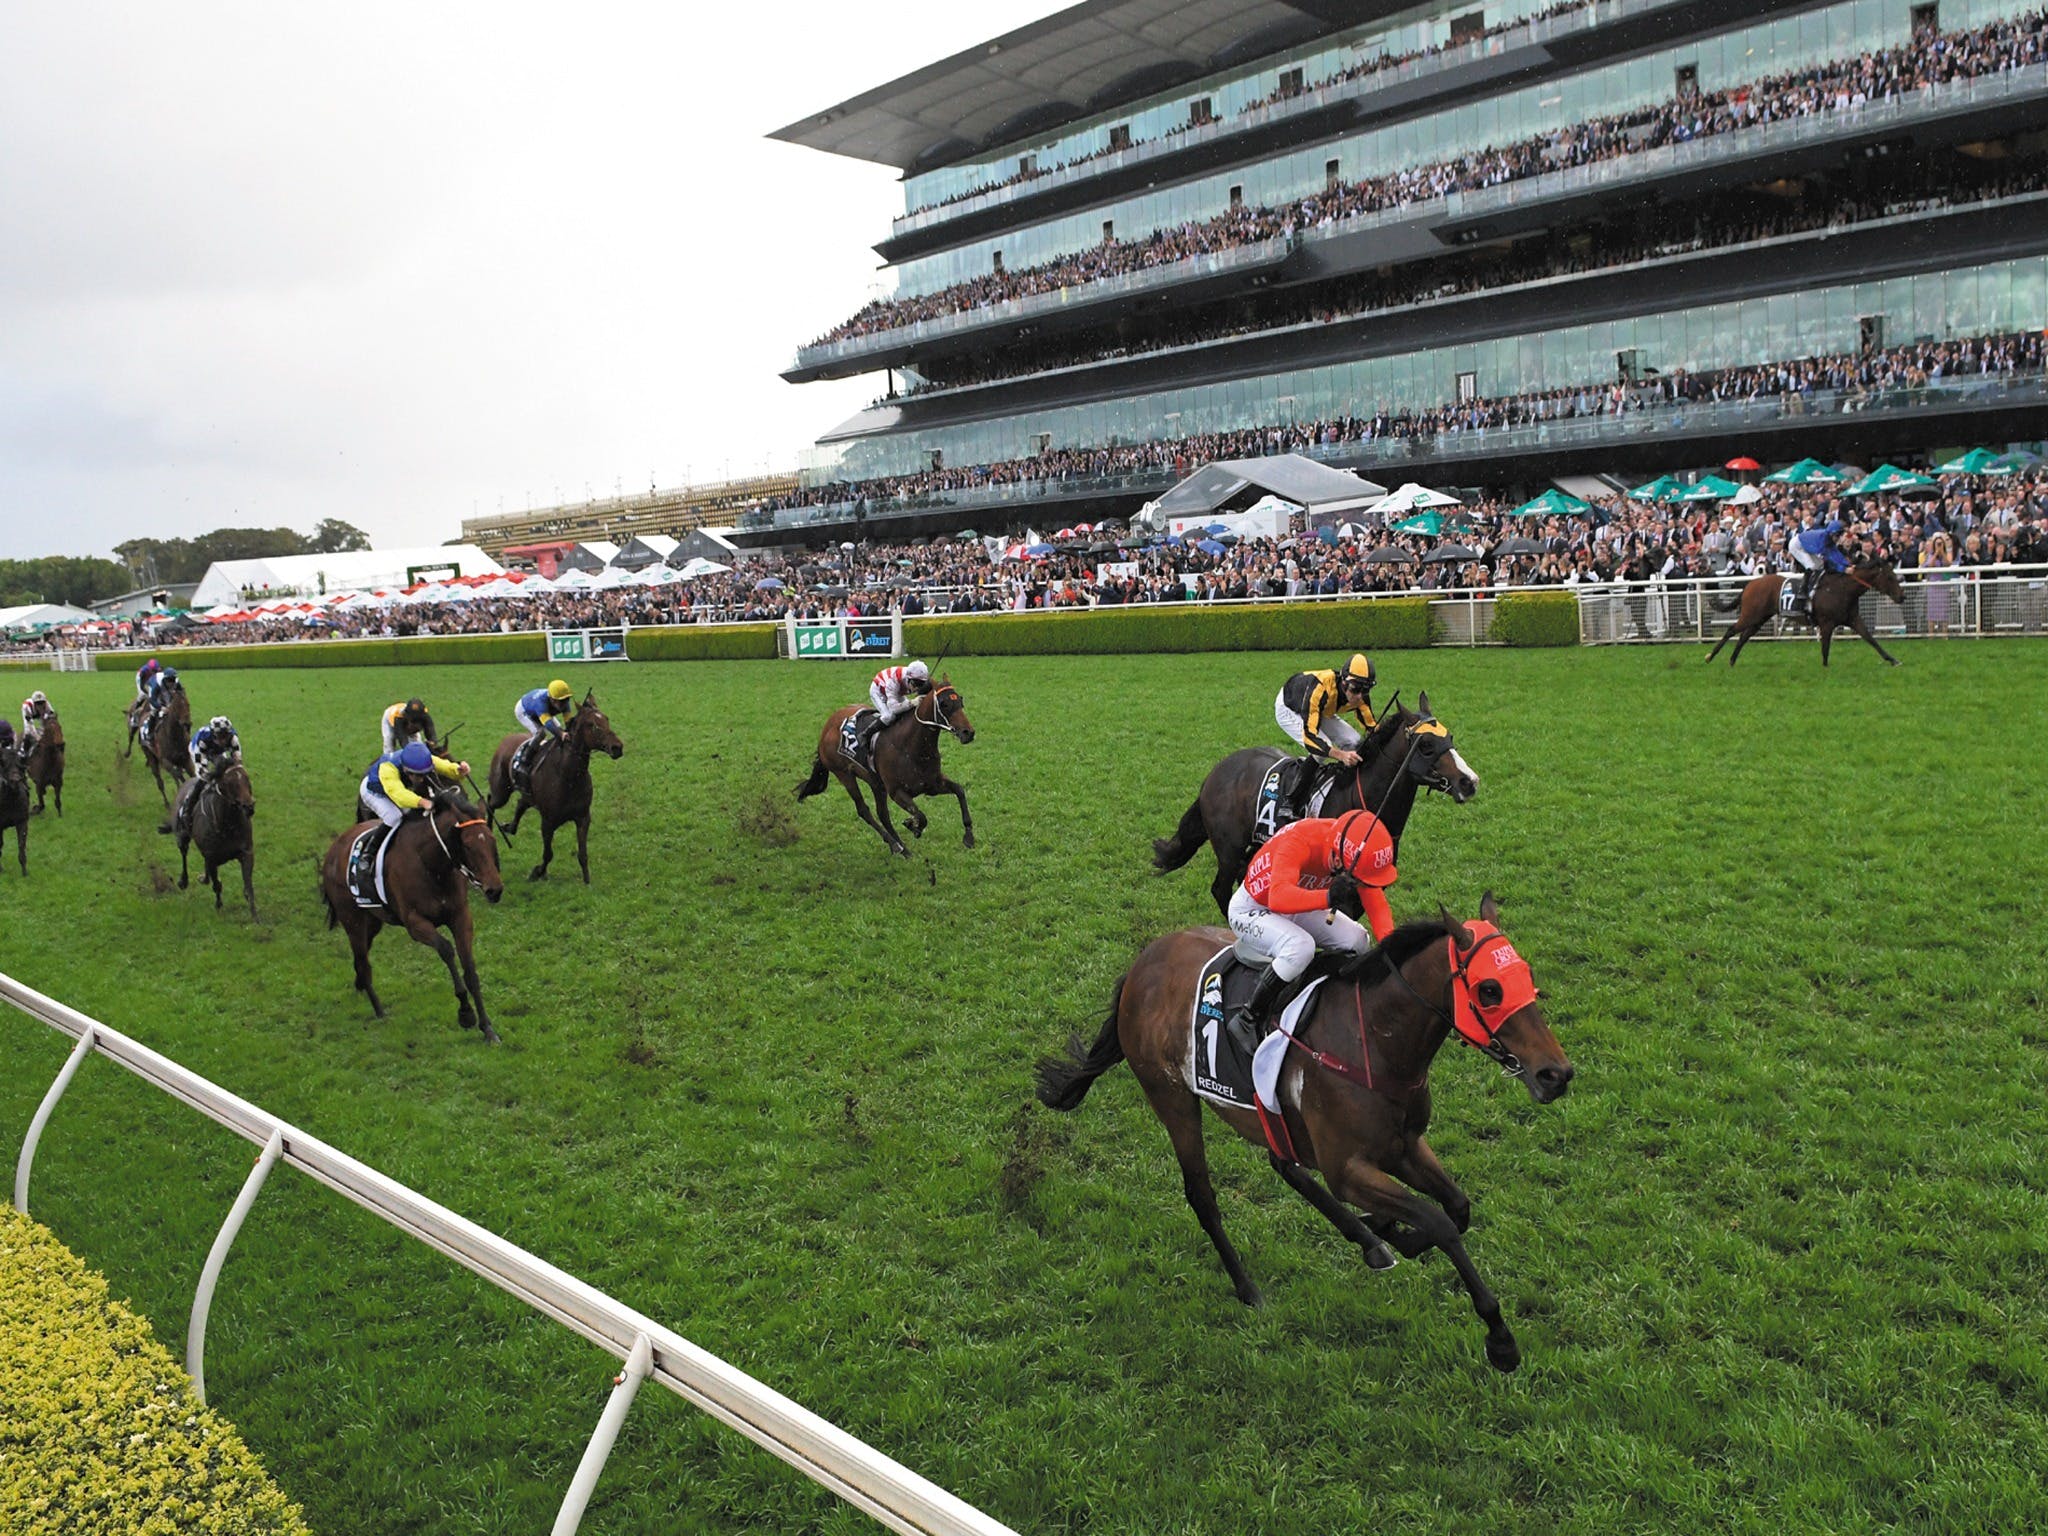 The TAB Everest The Worlds Richest Race On Turf - Accommodation Bookings